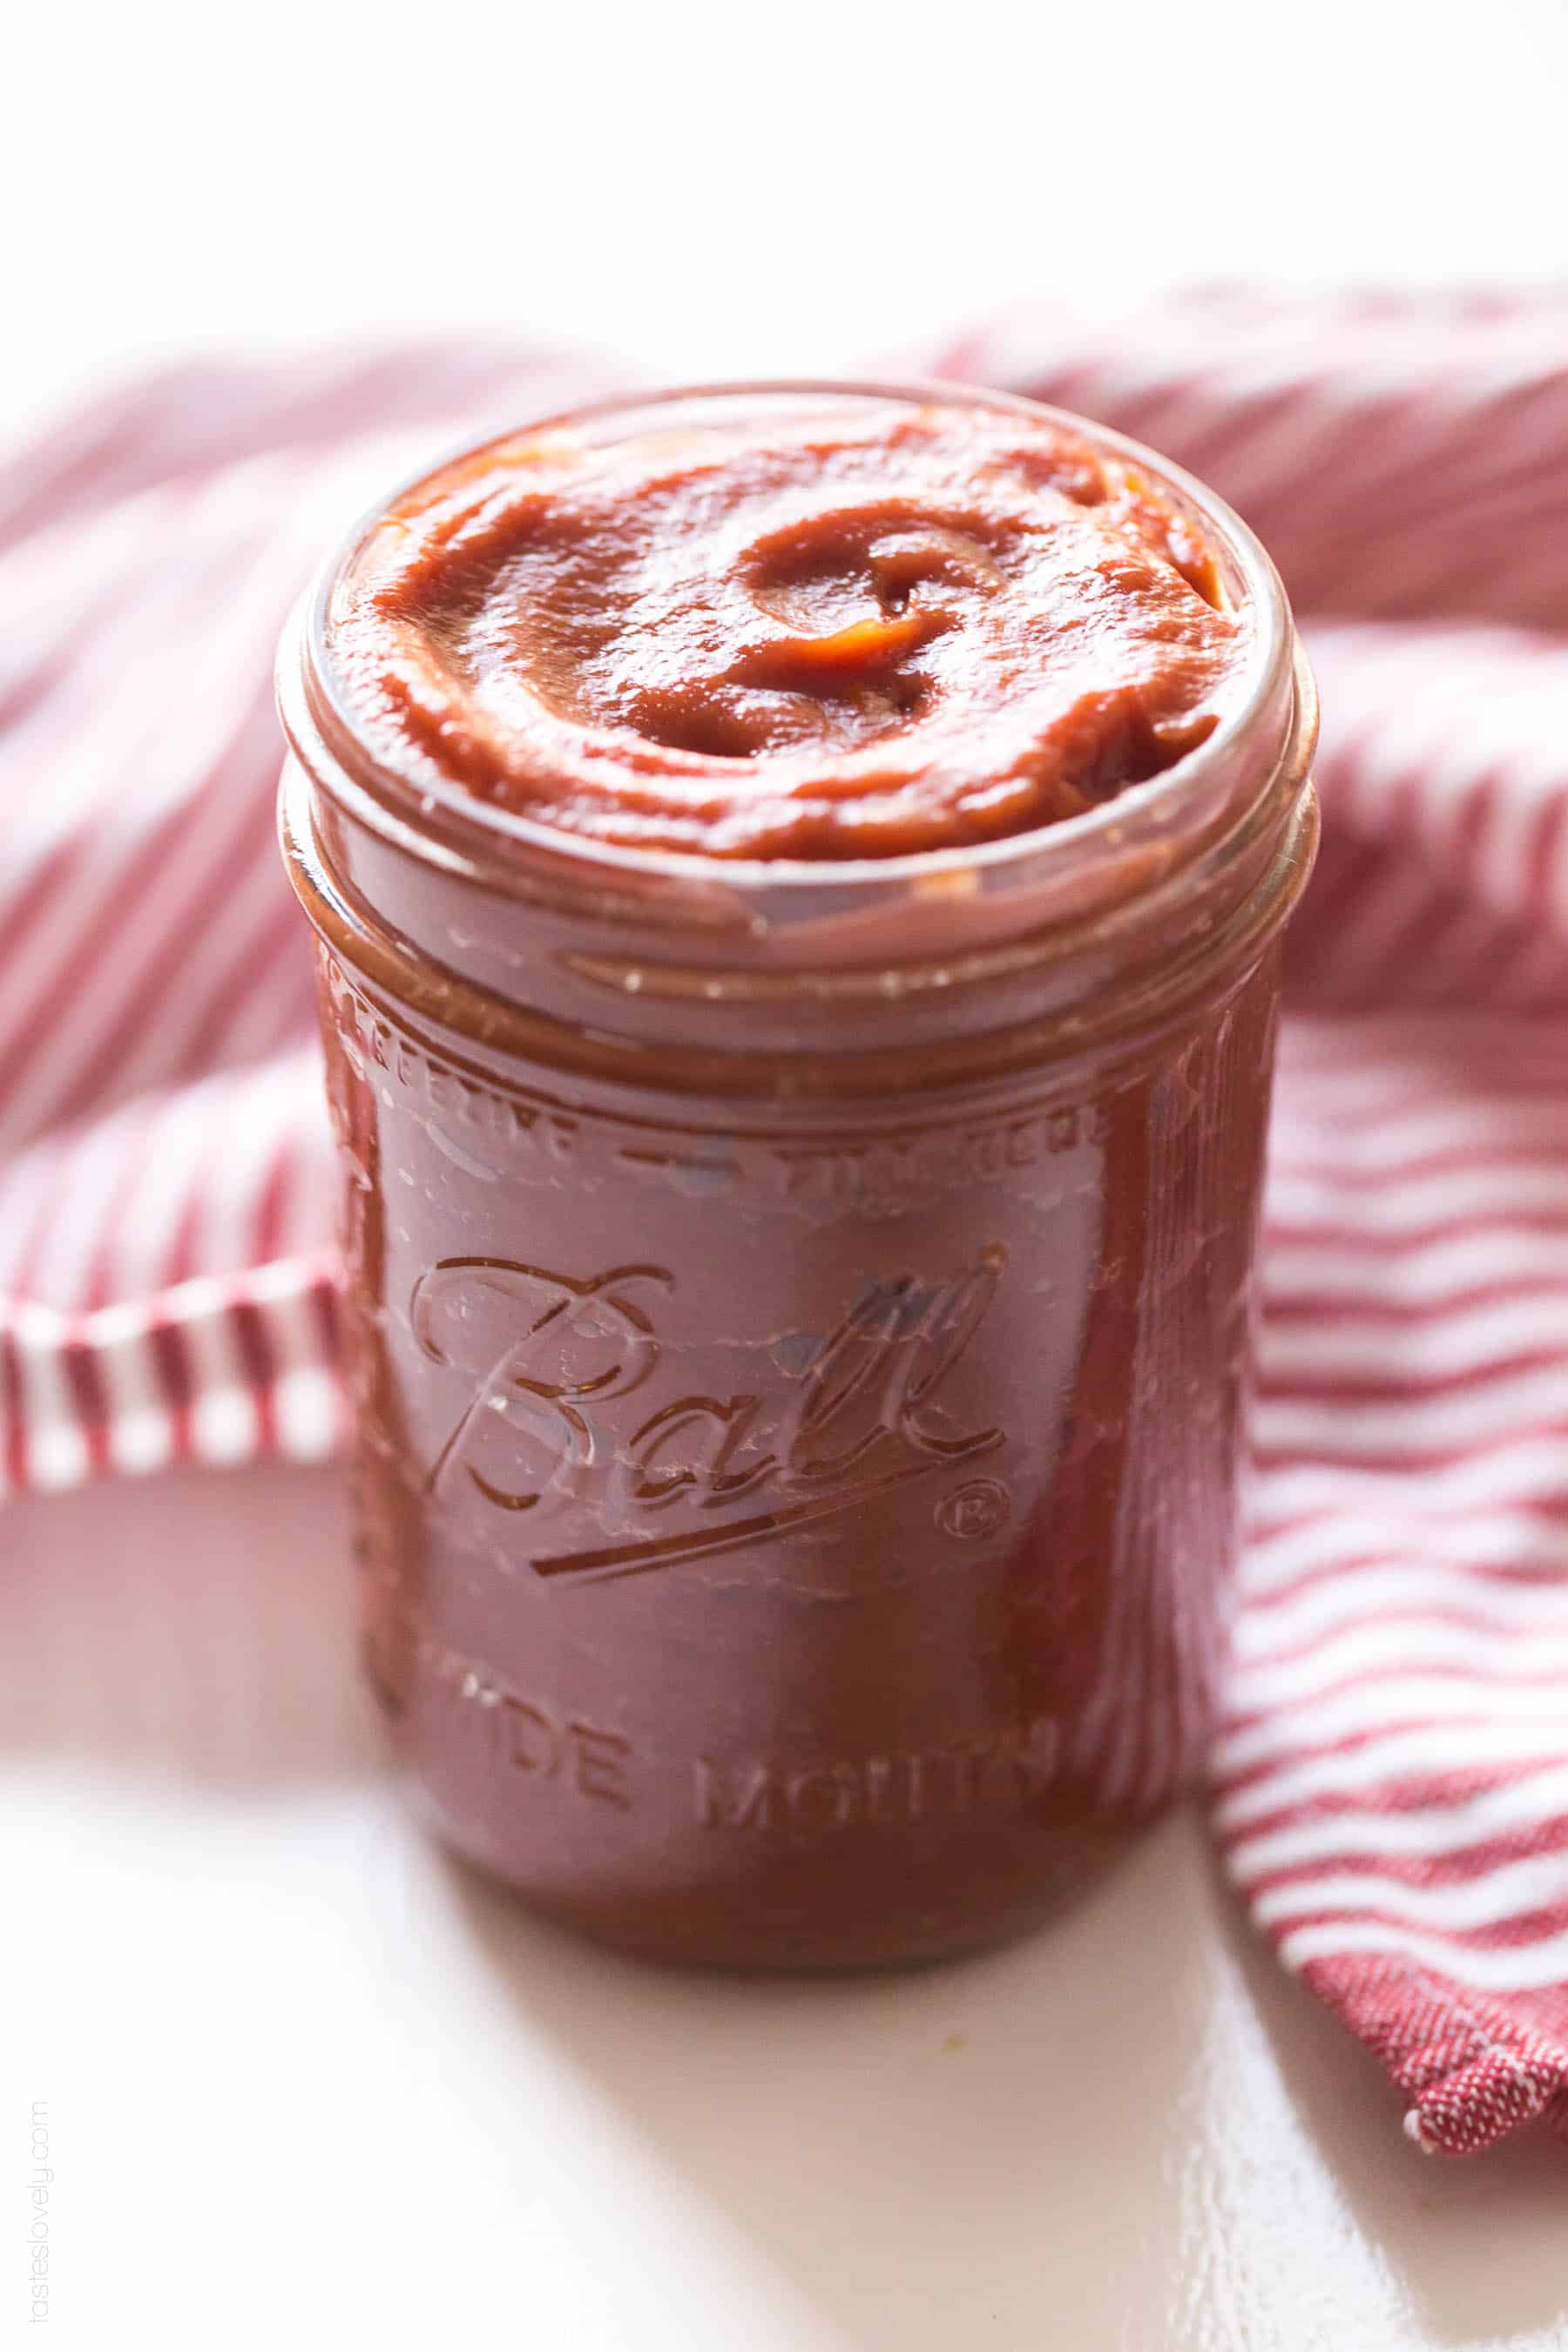 Easy Whole30 and Paleo Ketchup – a homemade Tessemae’s ketchup copycat recipe (gluten free, grain free, dairy free, sugar free, vegan, clean eating)